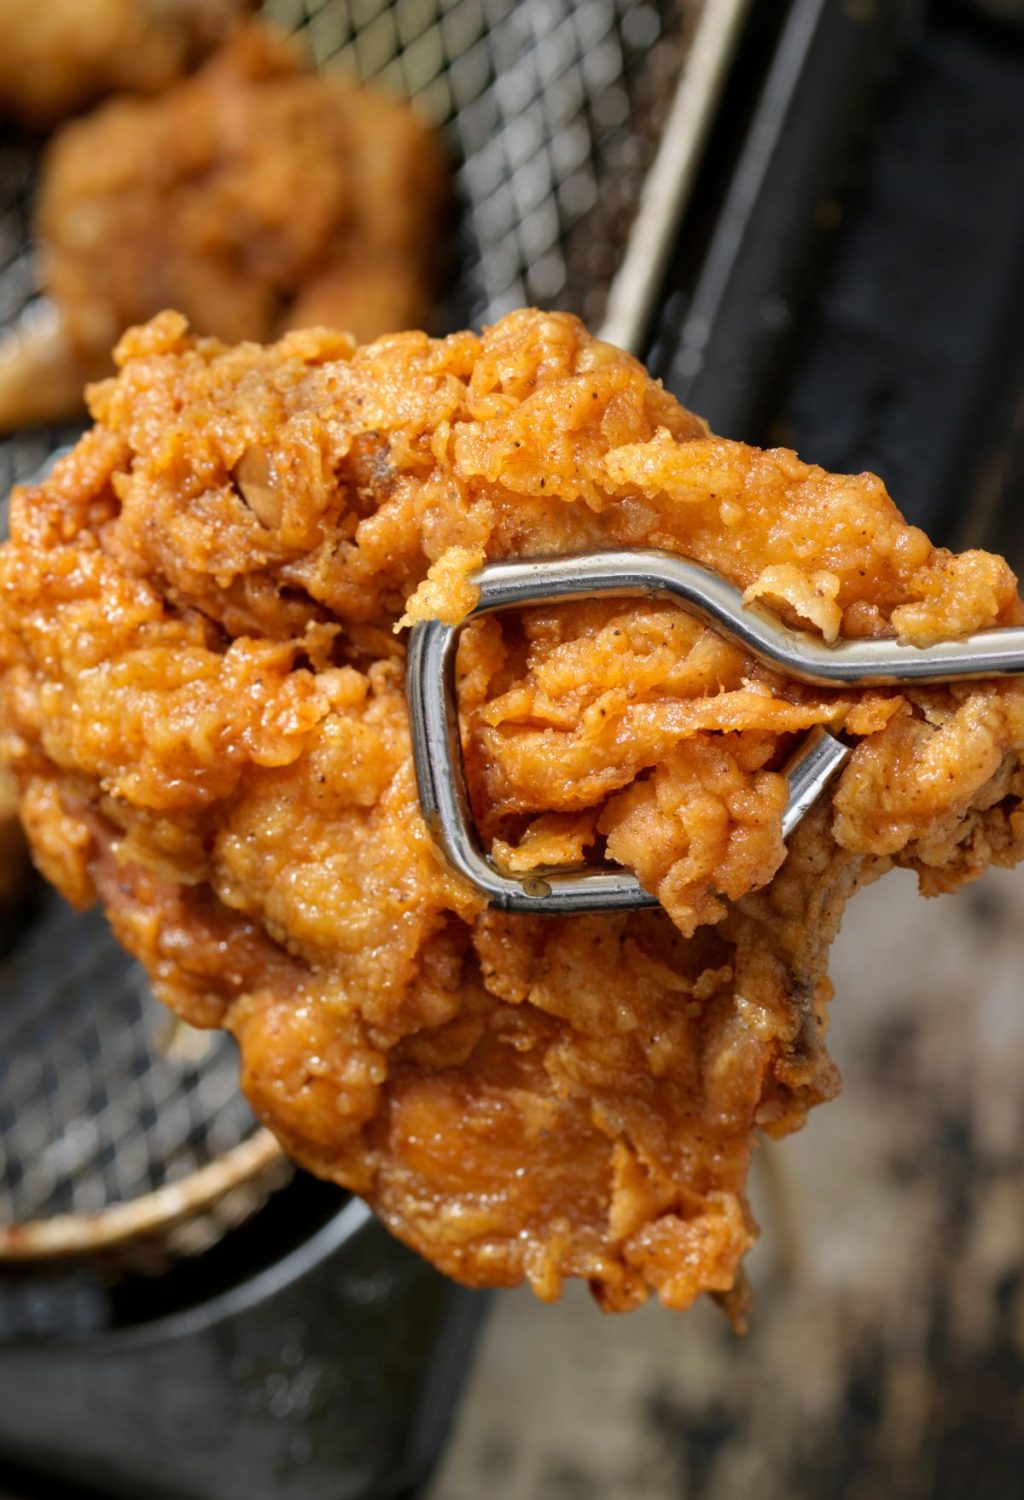 A fork is being used to pick up a piece of fried chicken.